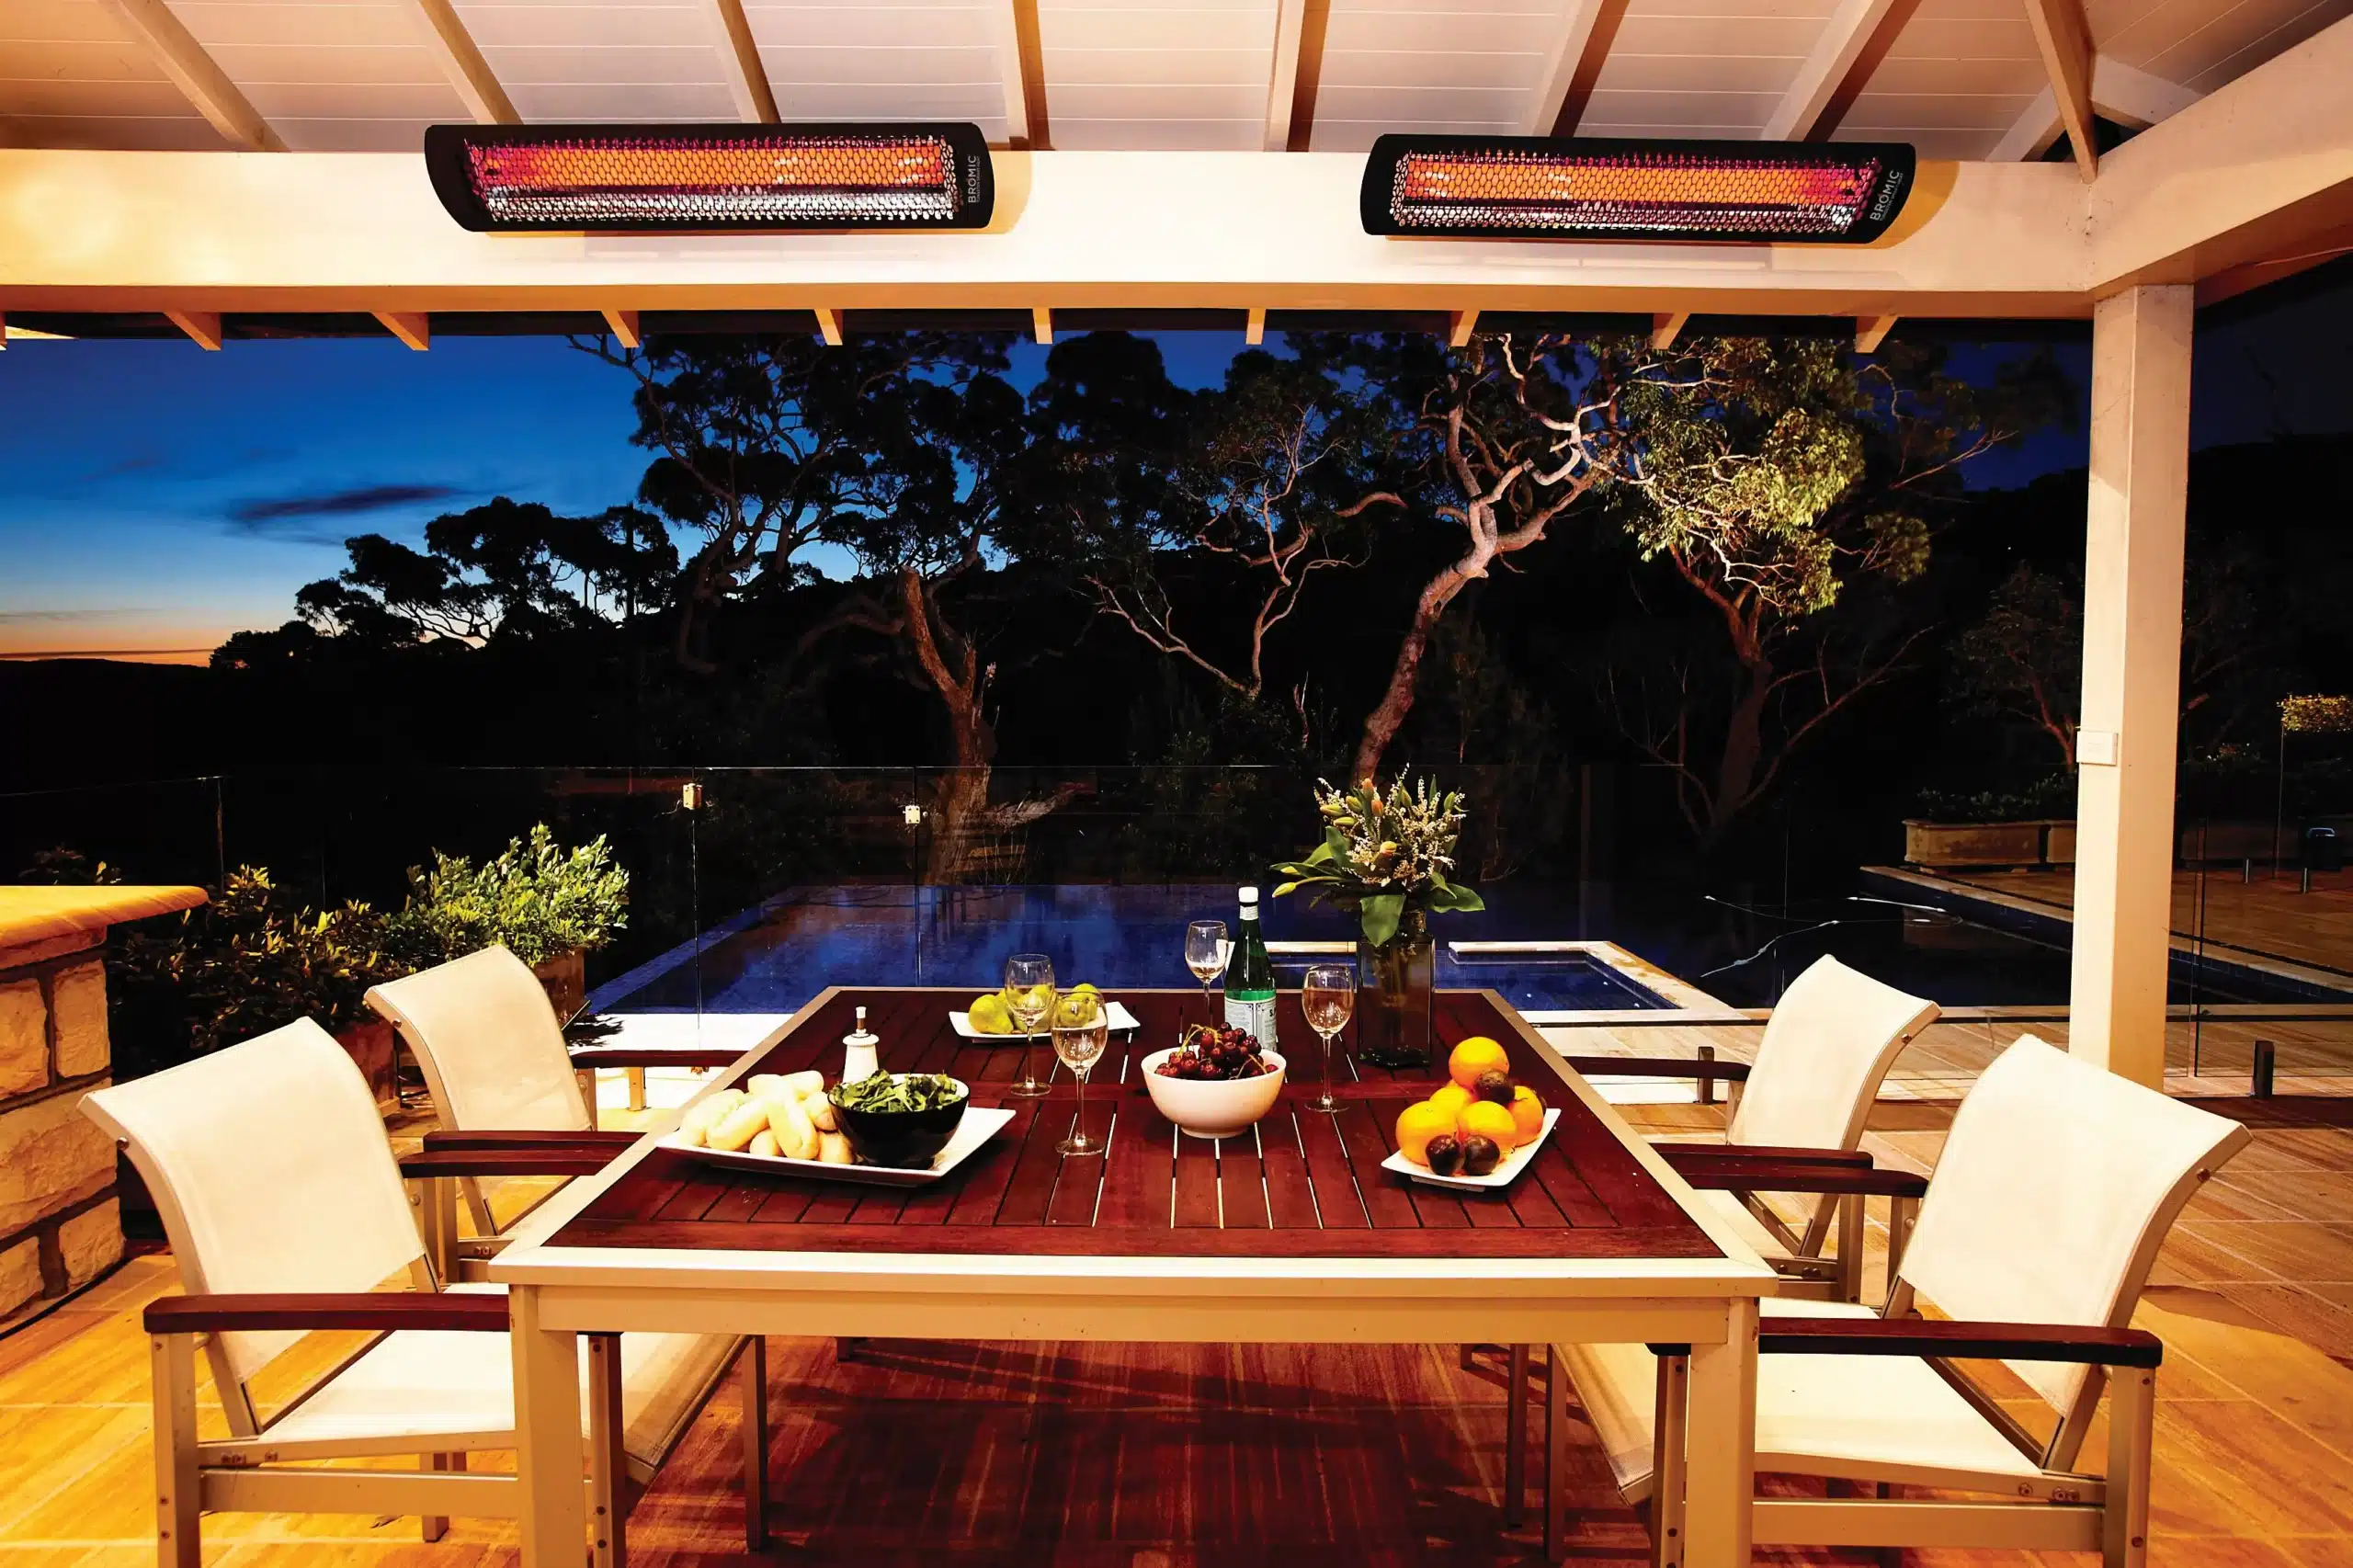 How To Light Patio Heater